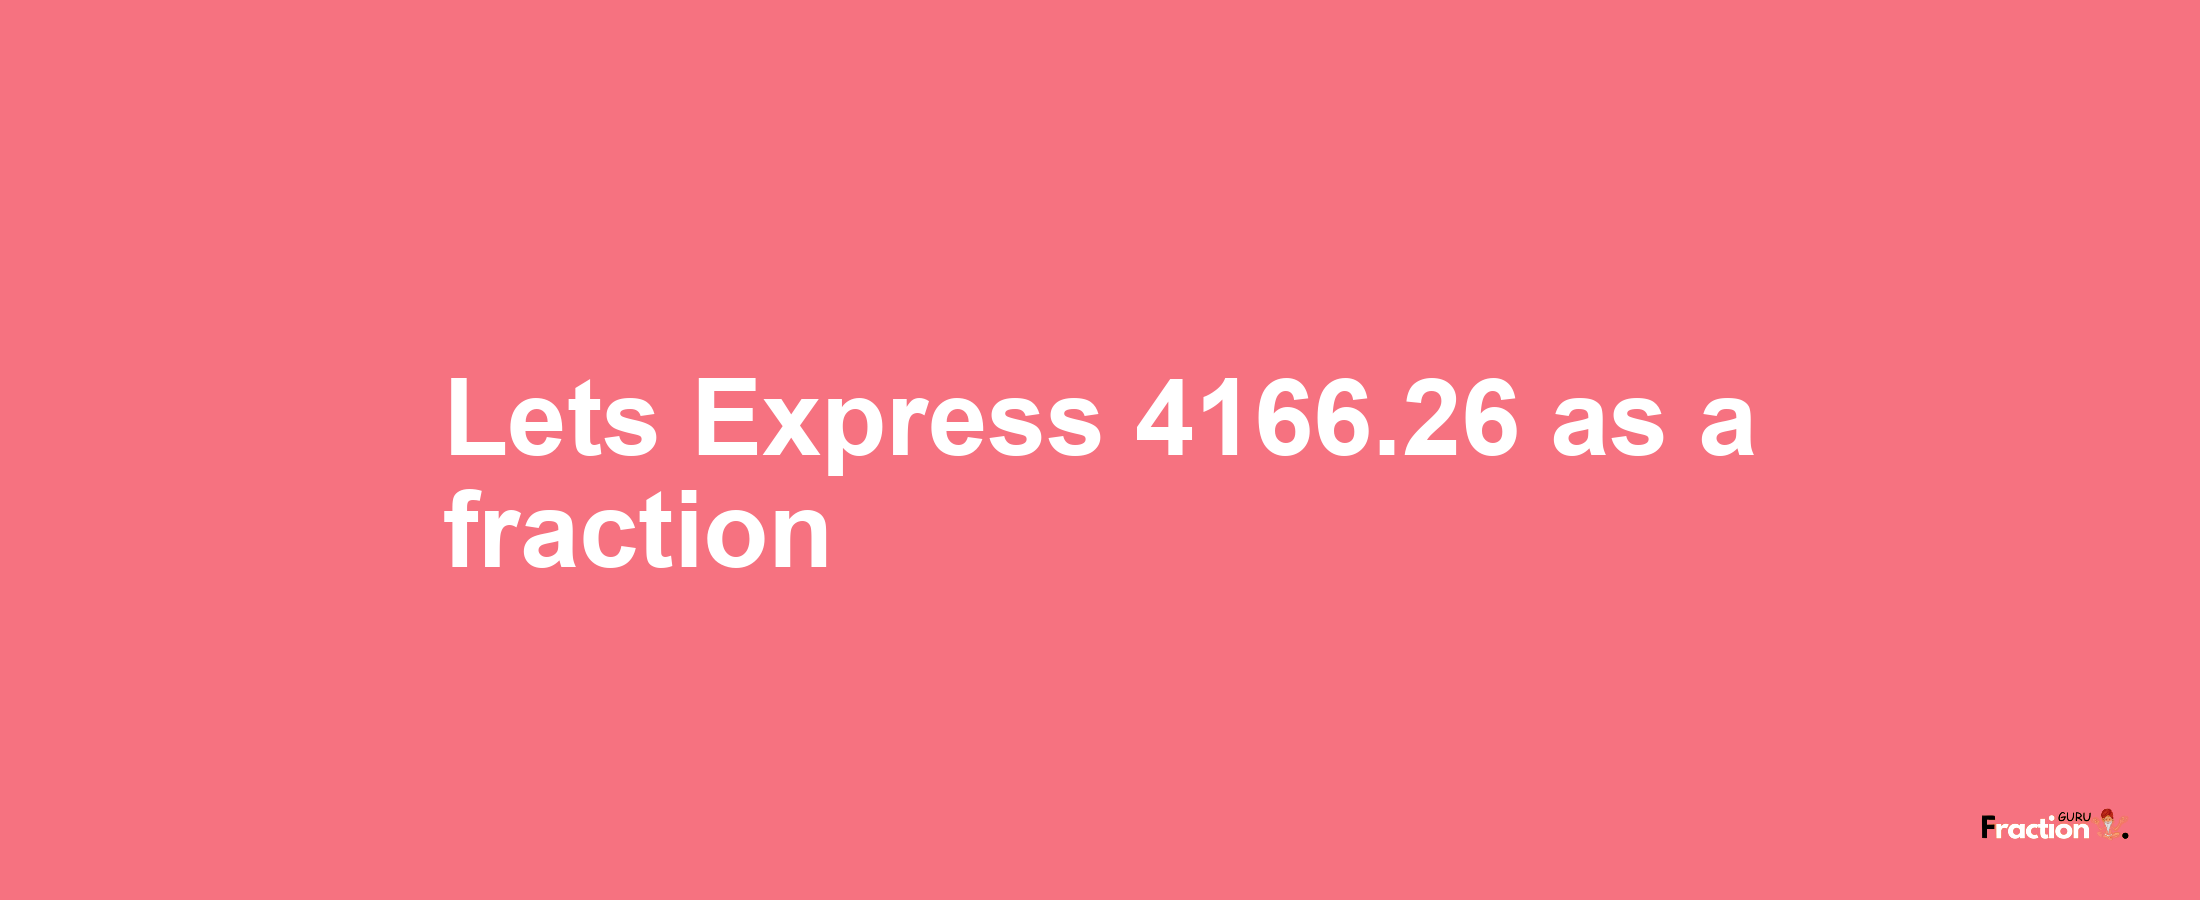 Lets Express 4166.26 as afraction